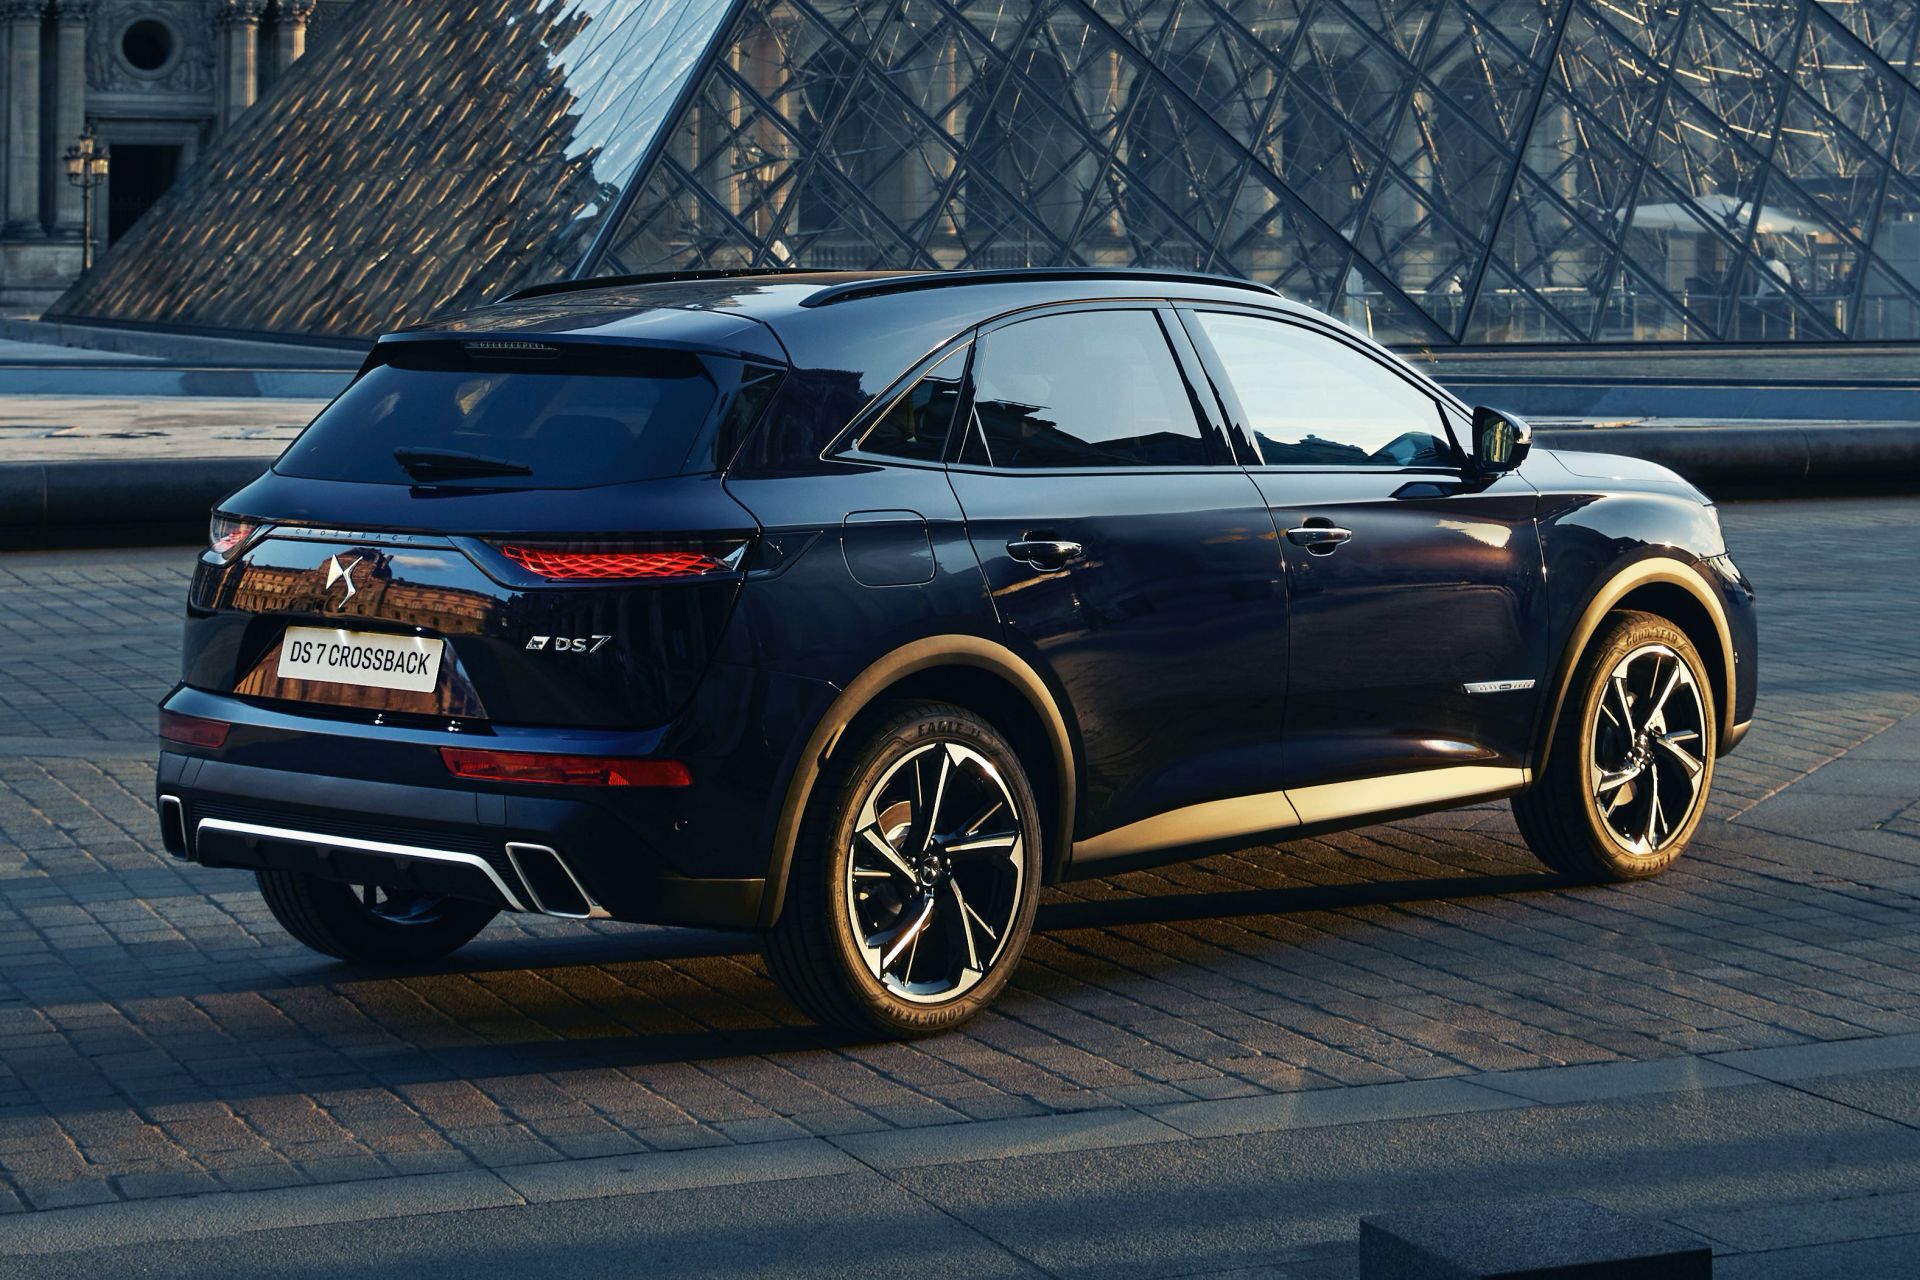 DS 7 CROSSBACK 2023